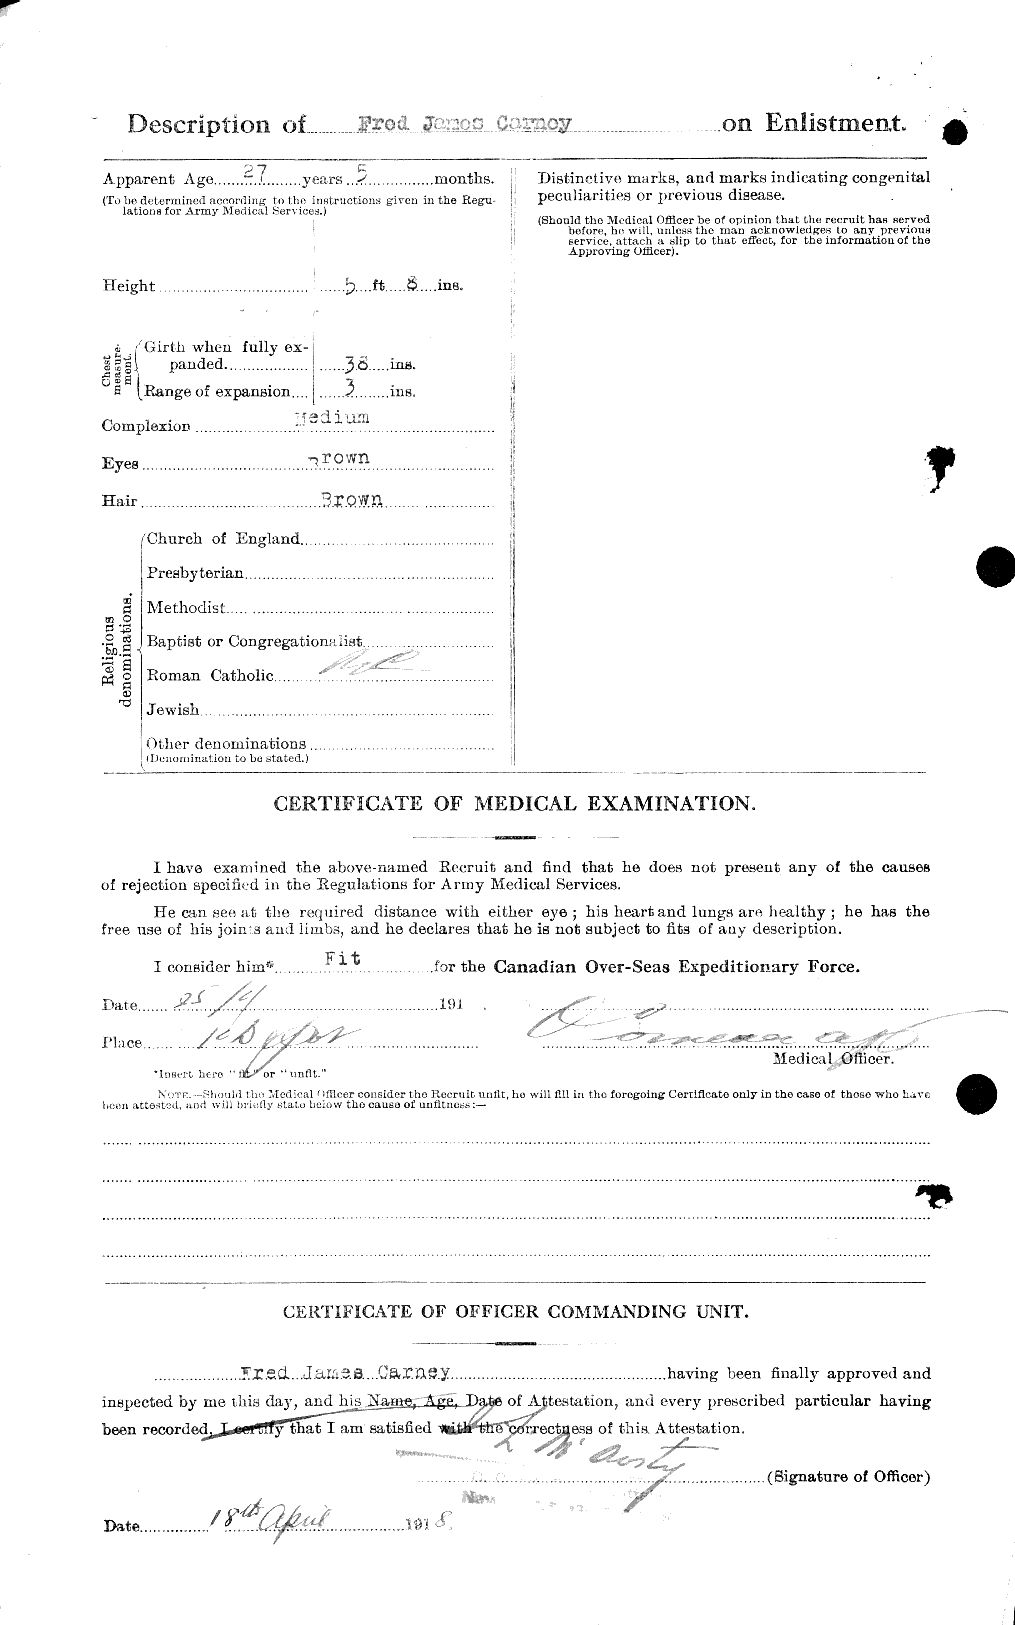 Personnel Records of the First World War - CEF 009961b